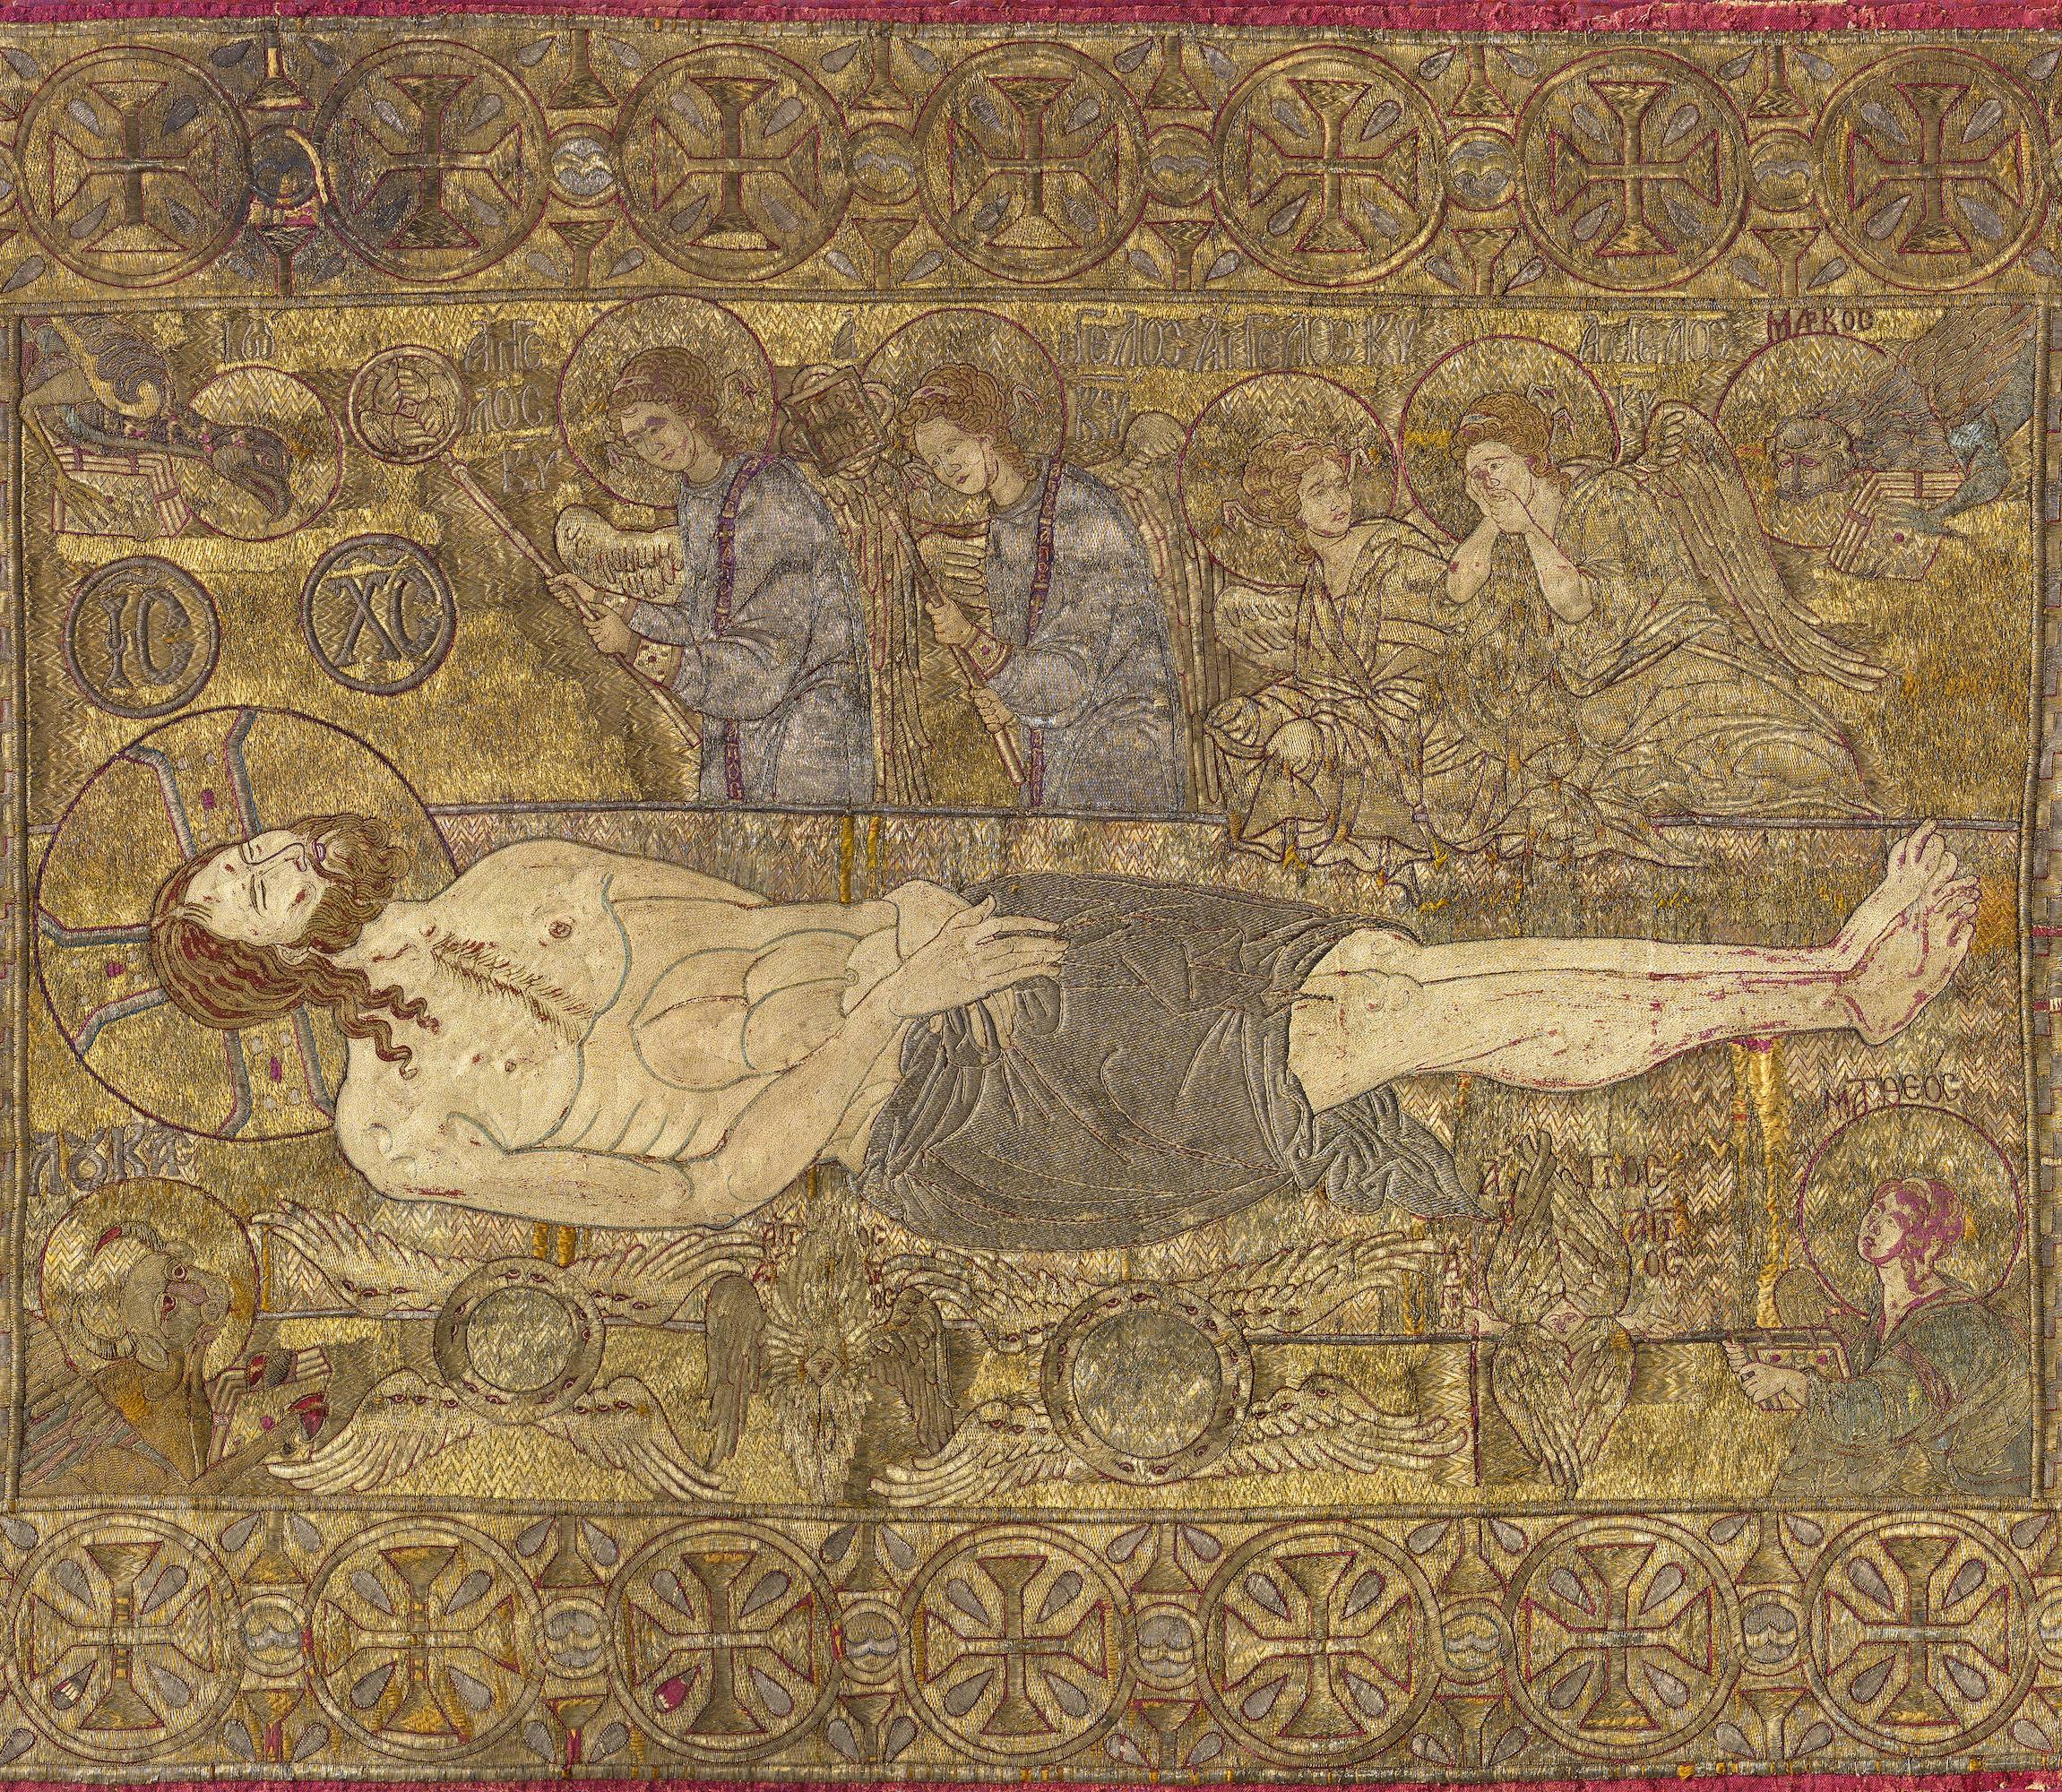 Thessaloniki Epitaphios, detail of the threnos, ca. 1300, embroidered textile, Museum of Byzantine Culture, No. ΒΥΦ 57, Thessaloniki, Greece (source: Hellenic Ministry of Culture and Sports. Museum of Byzantine Culture, Thessaloniki)

 